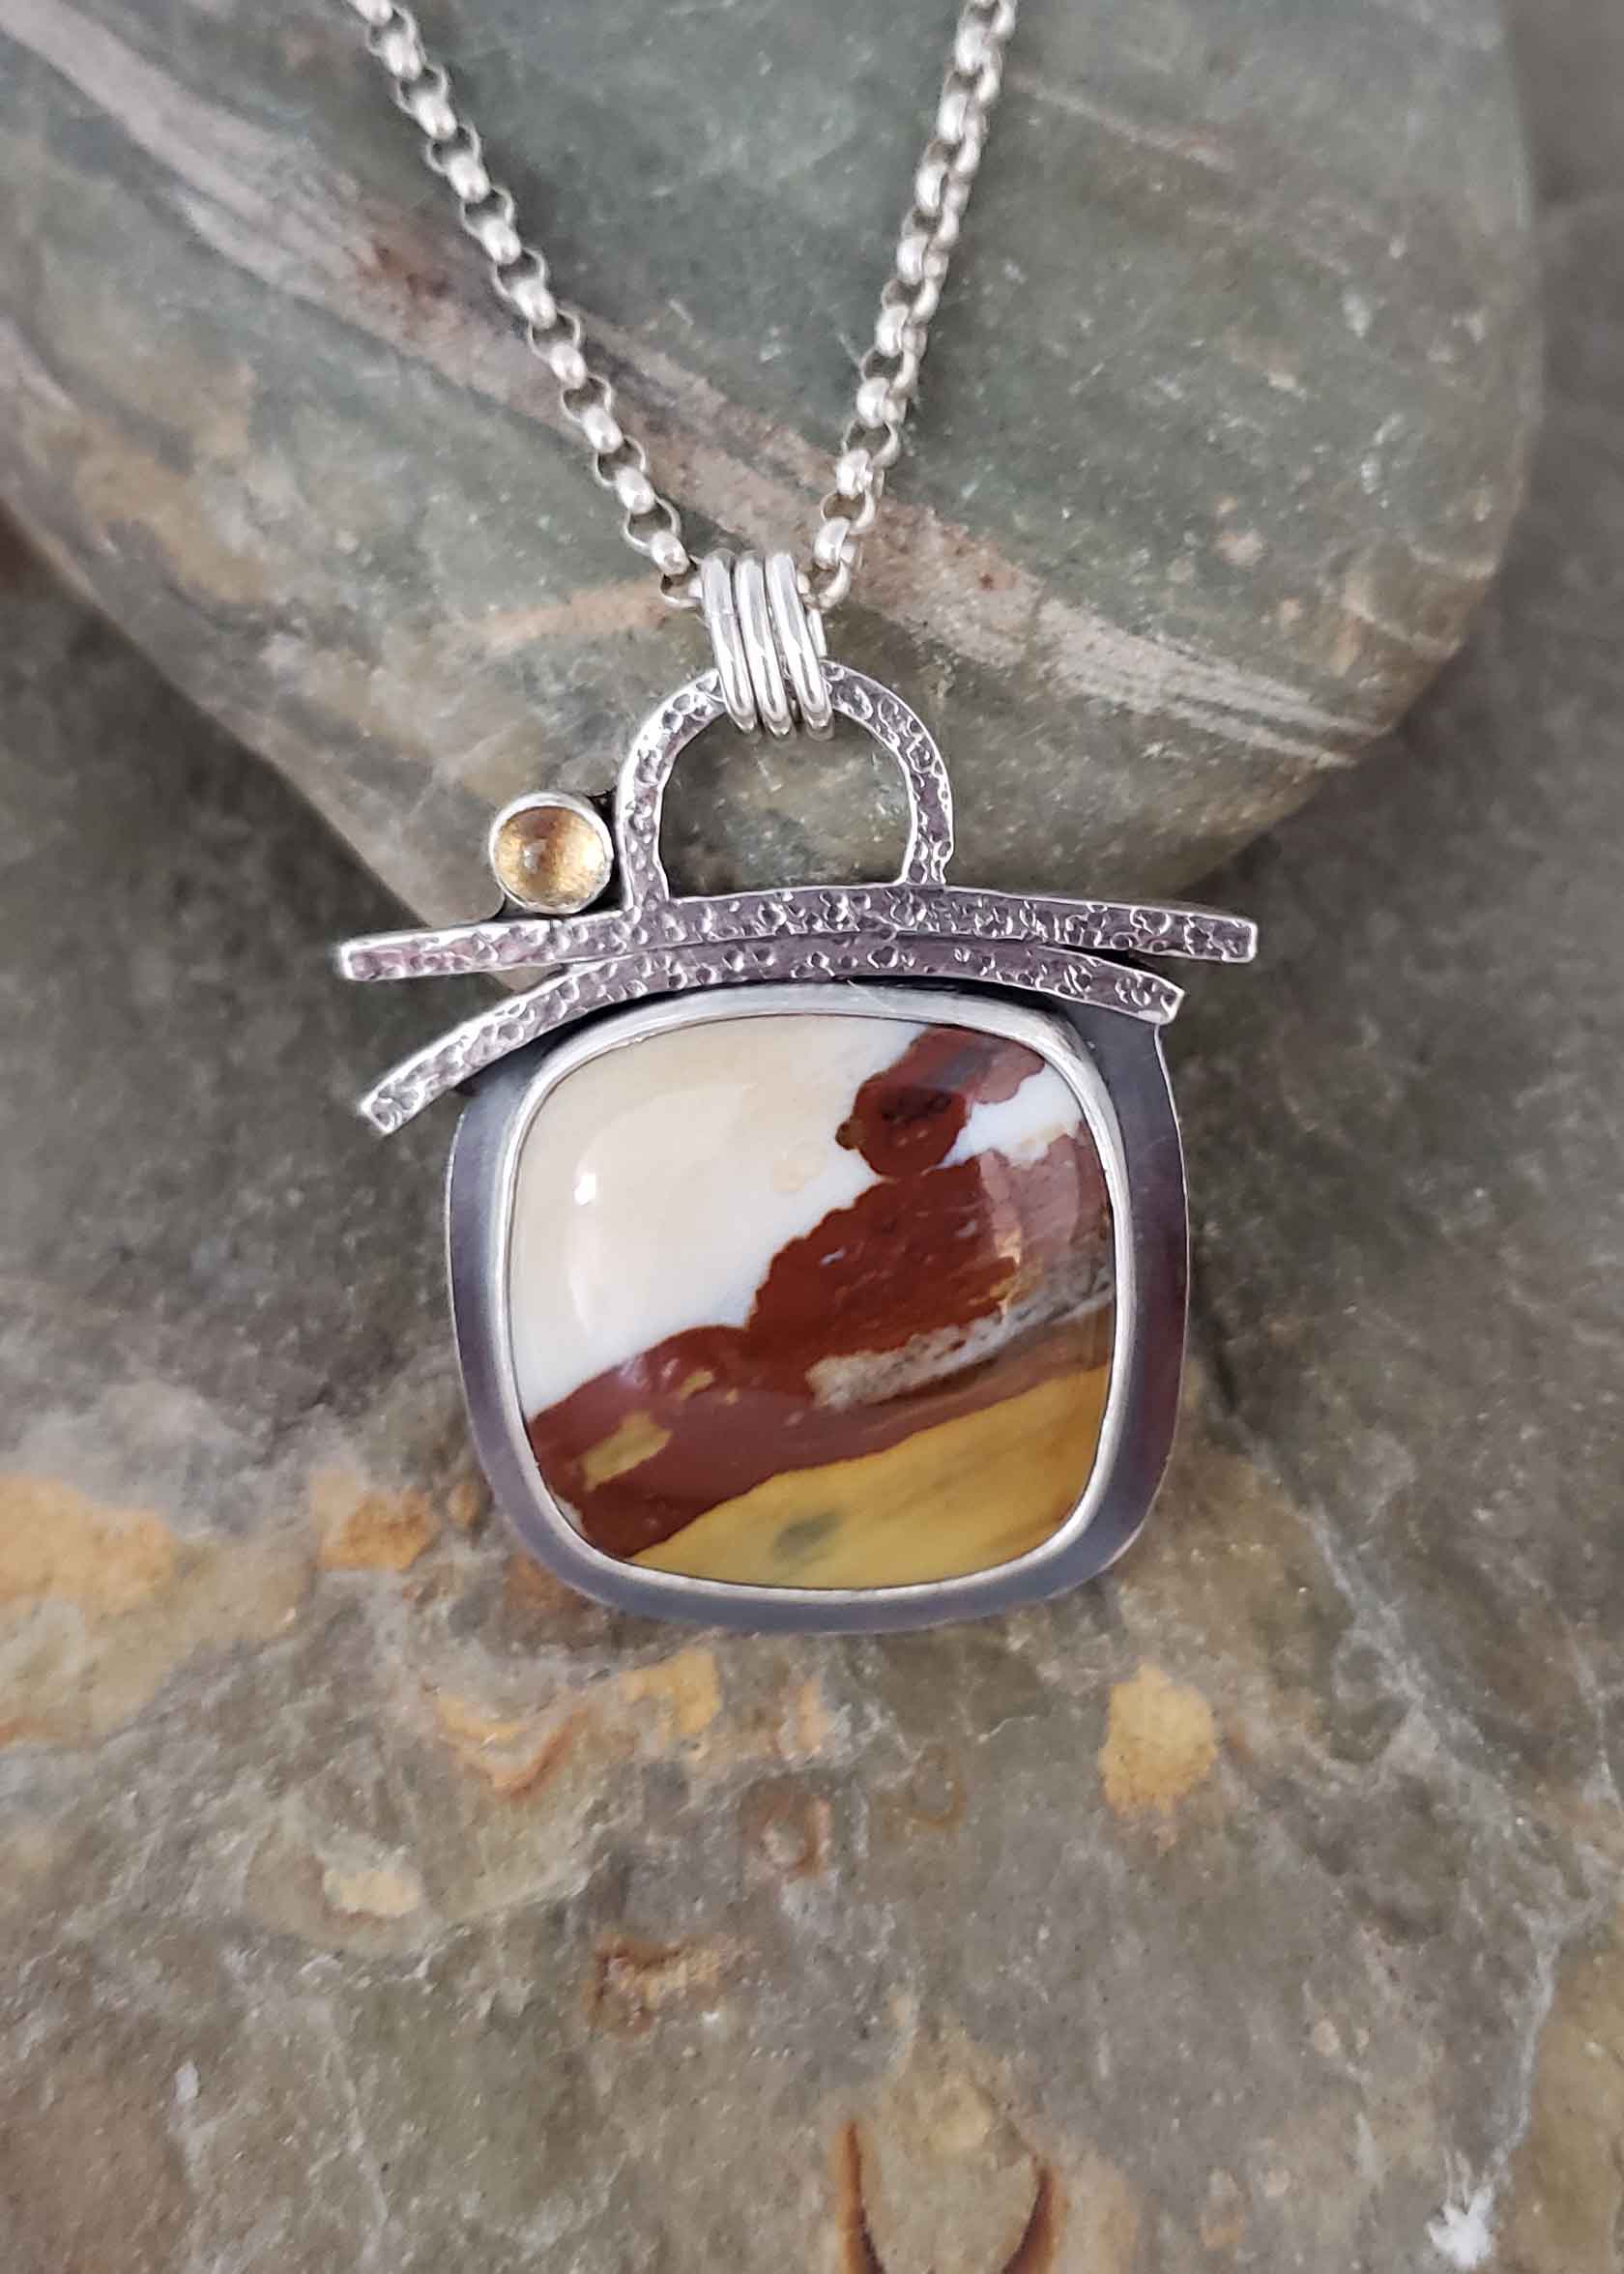 Gathering Storm – Polka Dot Agate and Citrine